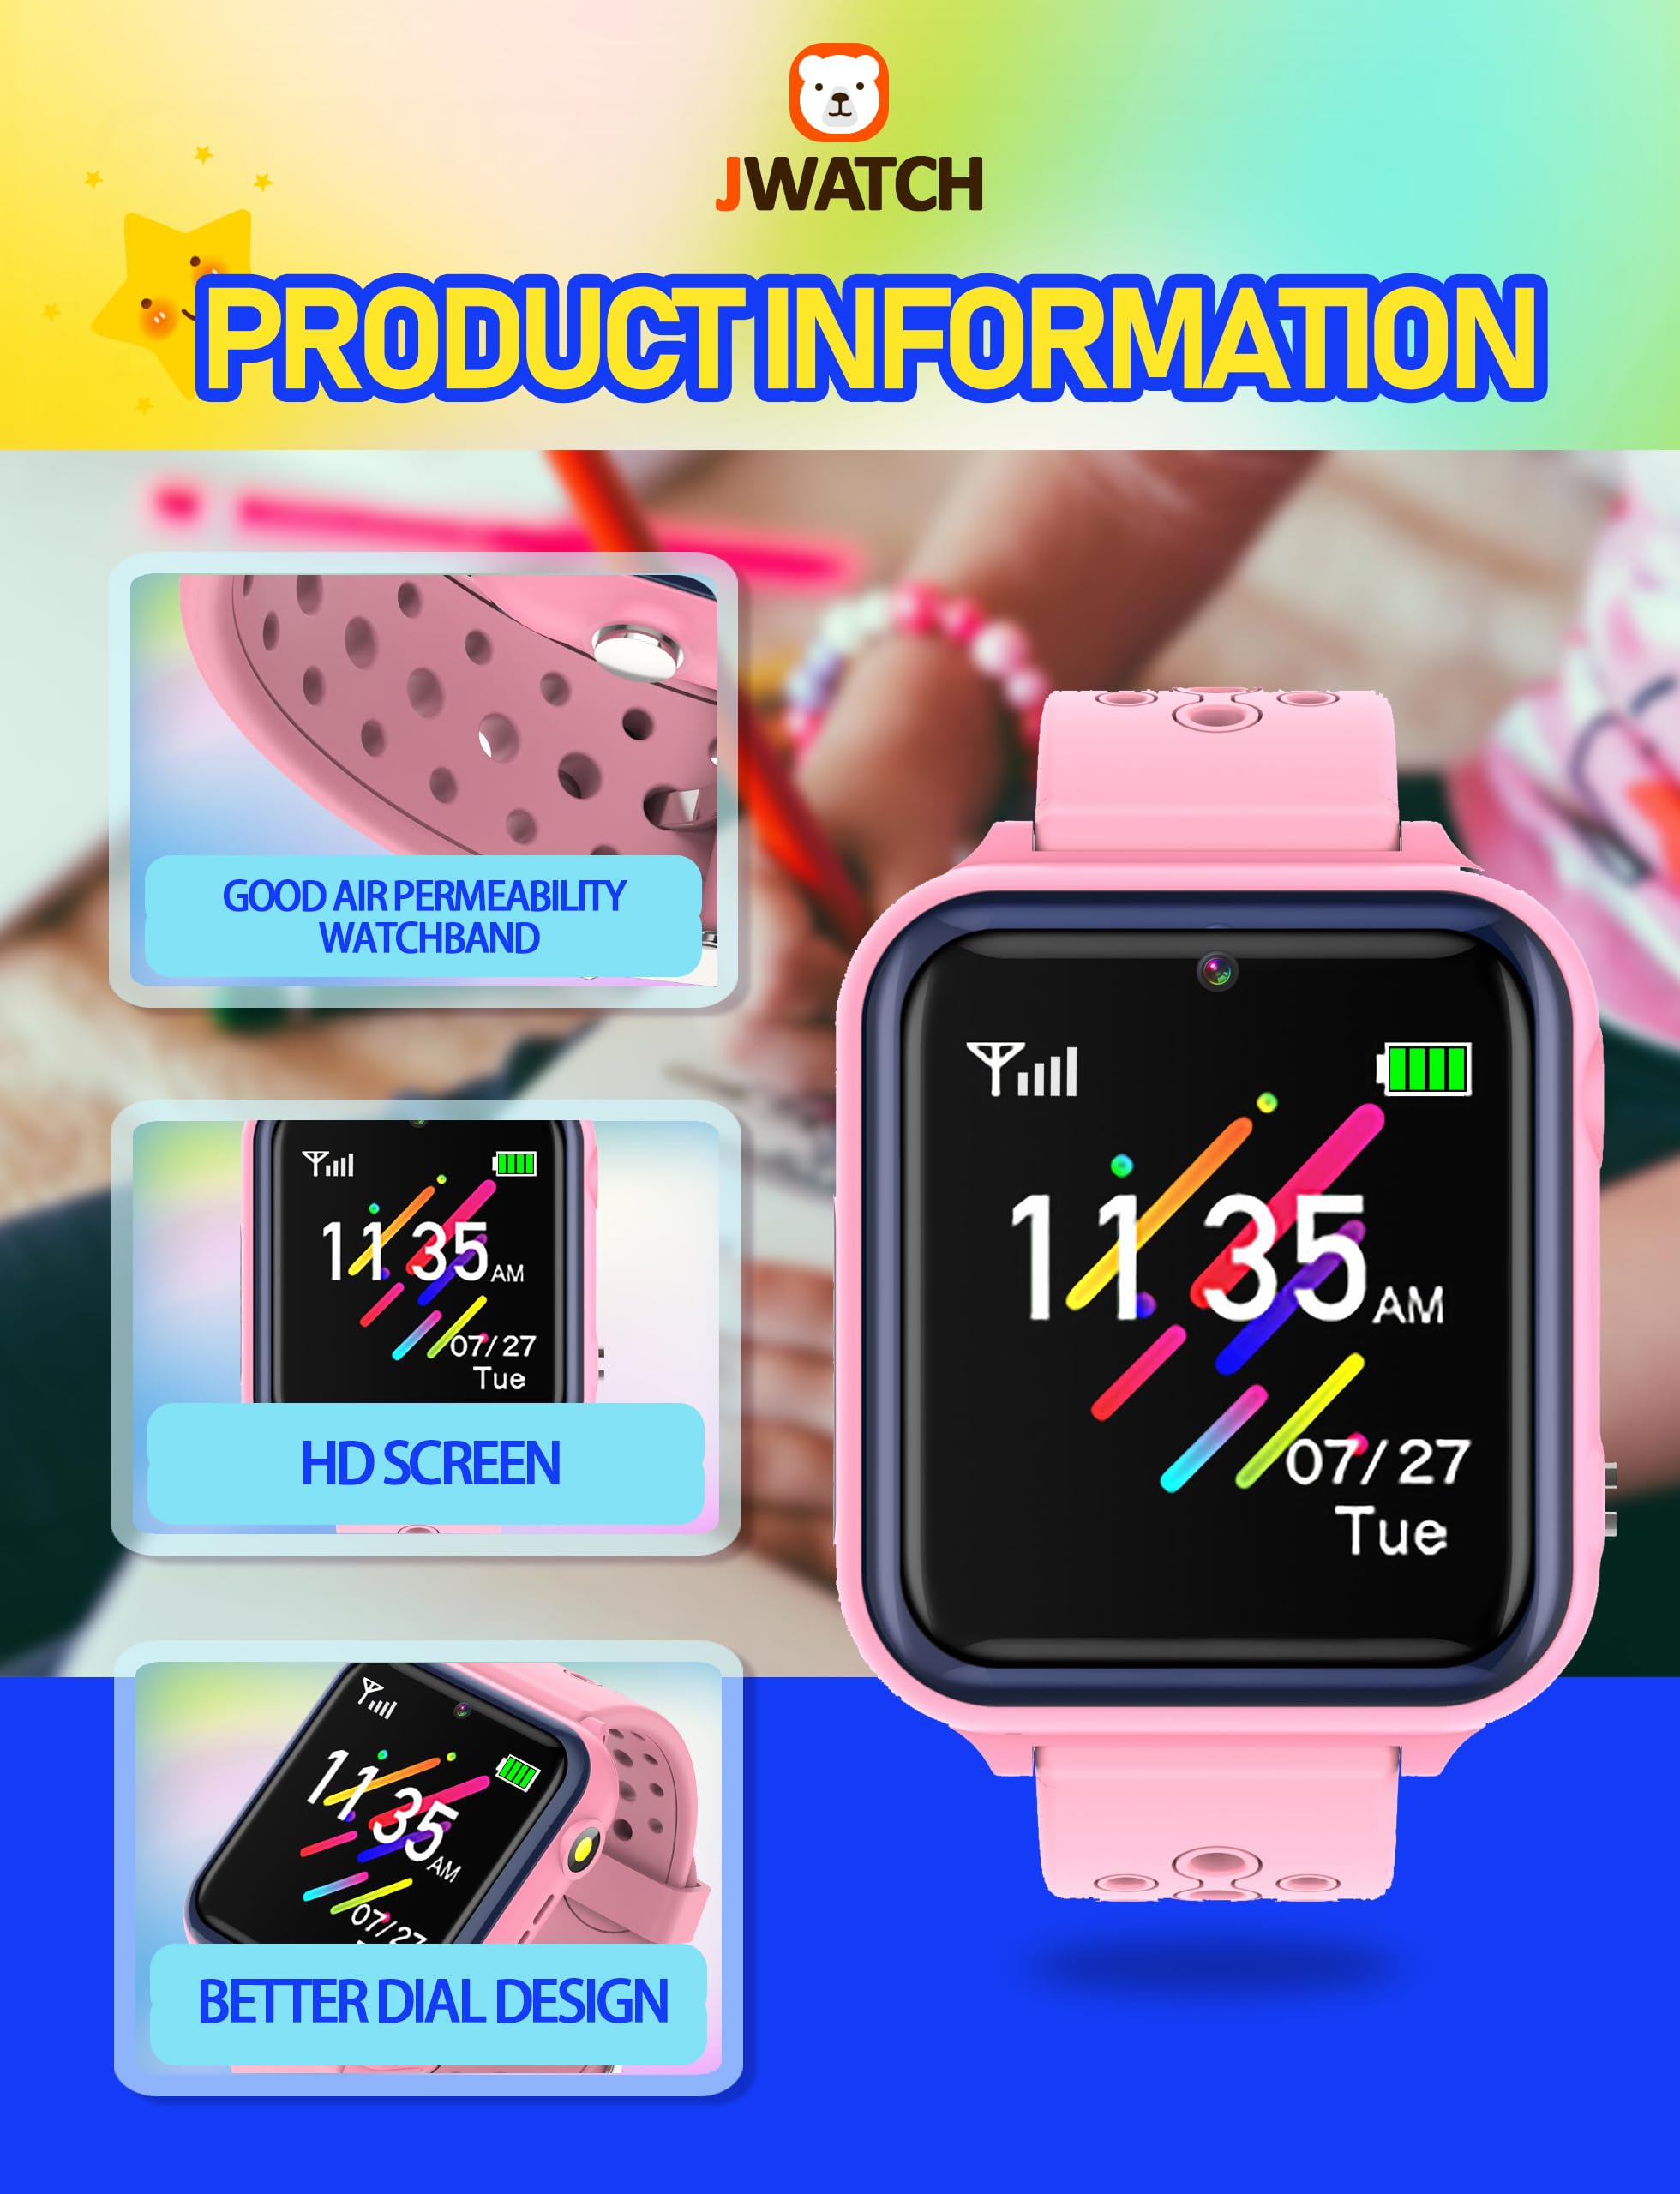 Jwatch Kids Smart Watch Phone Sos with 10 Stories 16 Puzzle Games Stopwatch Alarm Clock Kids Watches Toys for 6 7 8 9 10 11 12 Boys Girls Gift for Birthday Christmas （Pink）…